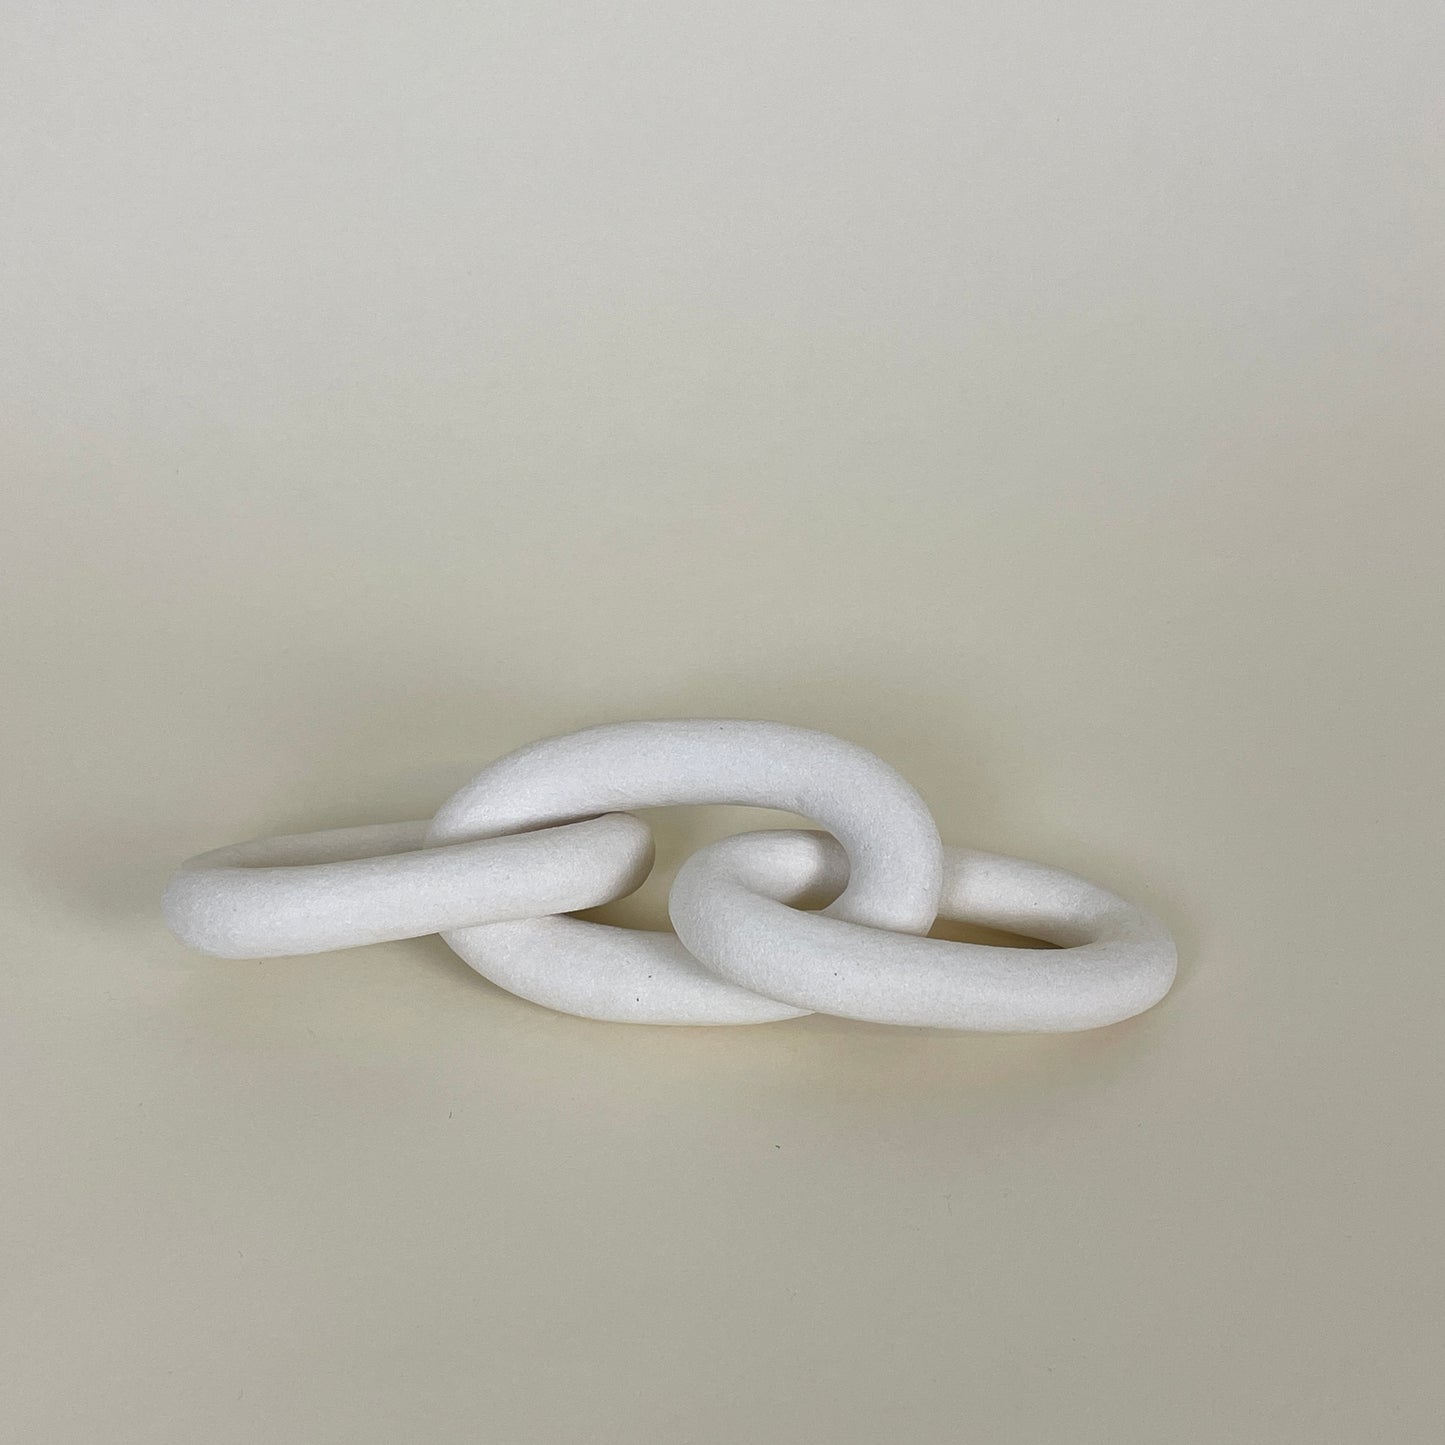 Chain, 3 links, by Kerstin Olsson